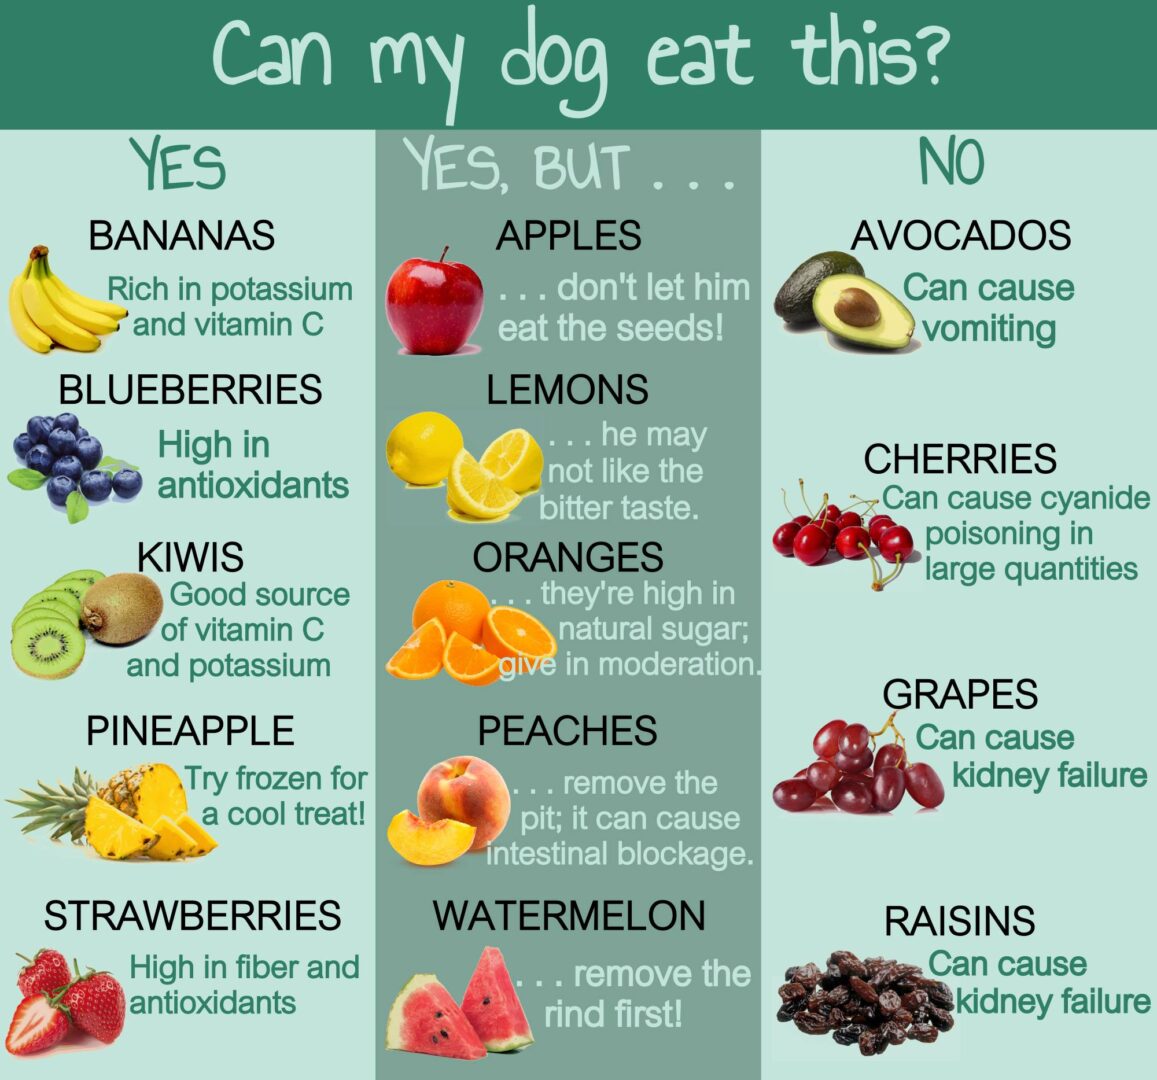 WHAT DOGS CAN EAT